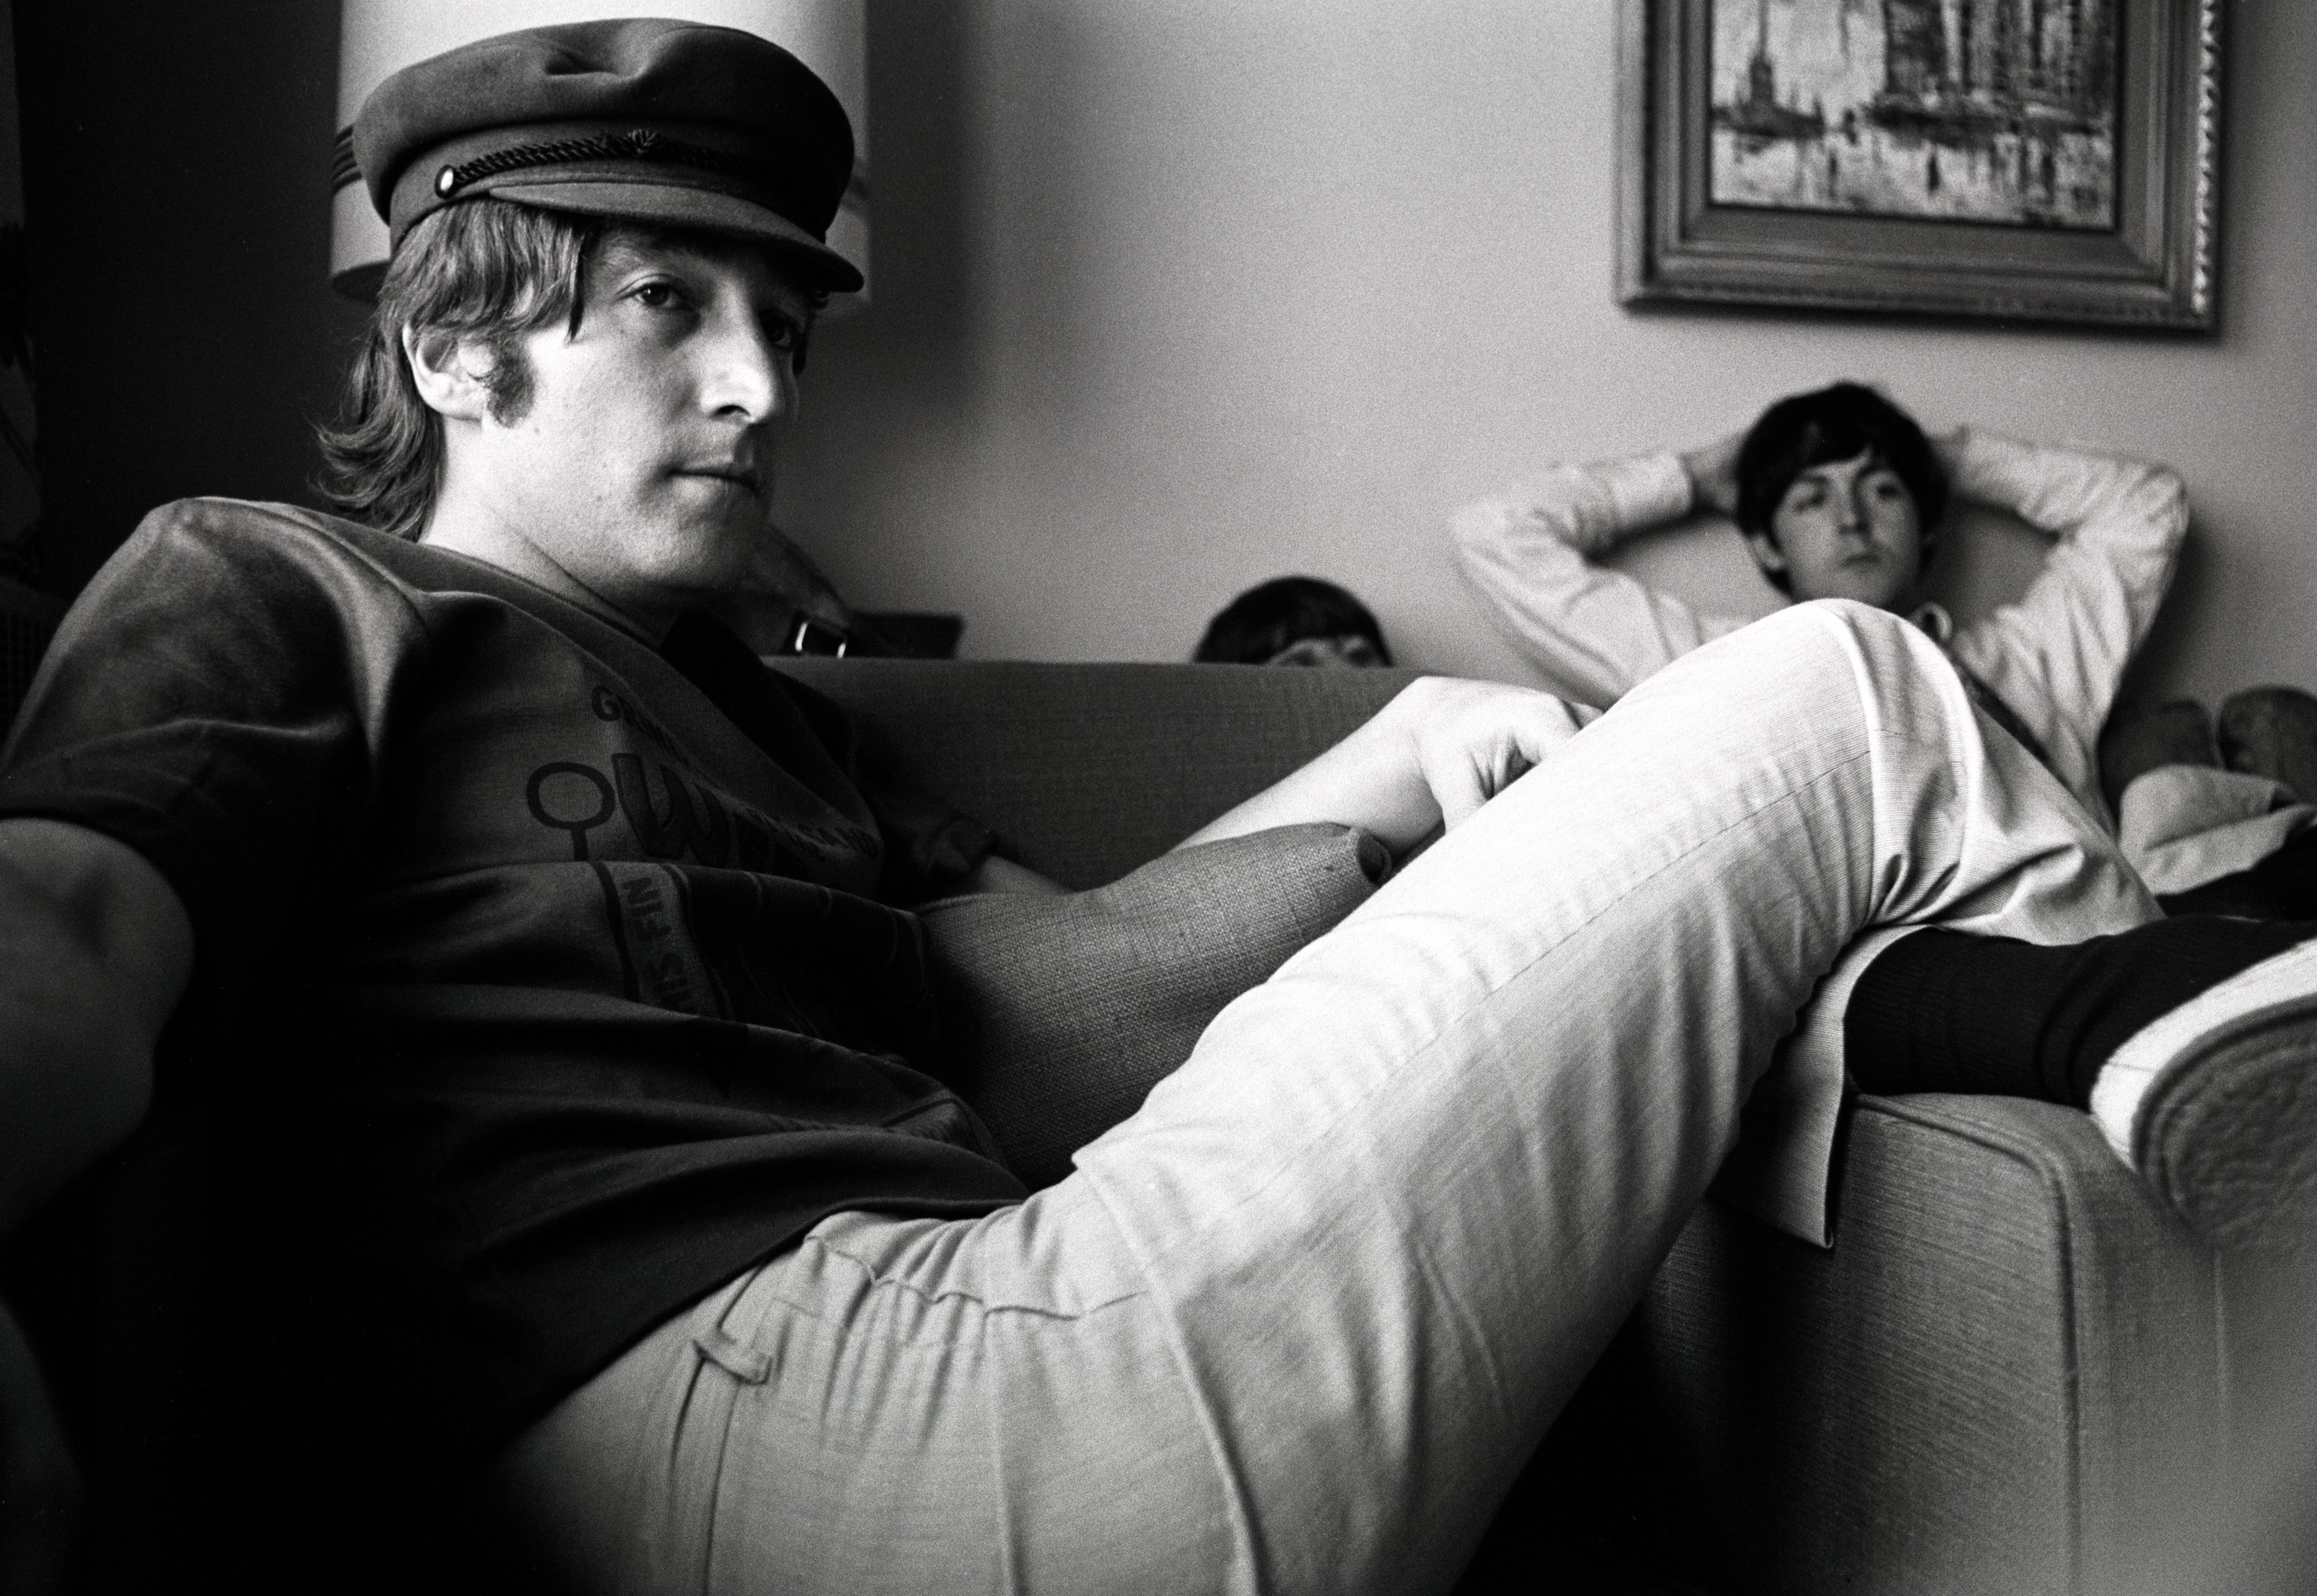 John Lennon and Paul McCartney of the Beatles at the Westwood Hotel in Anchorage, Alaska, 27th-28th June 1966. En route for the Japanese leg of their final world tour, the group made an unscheduled overnight stop in Alaska to avoid Typhoon Kit.

All